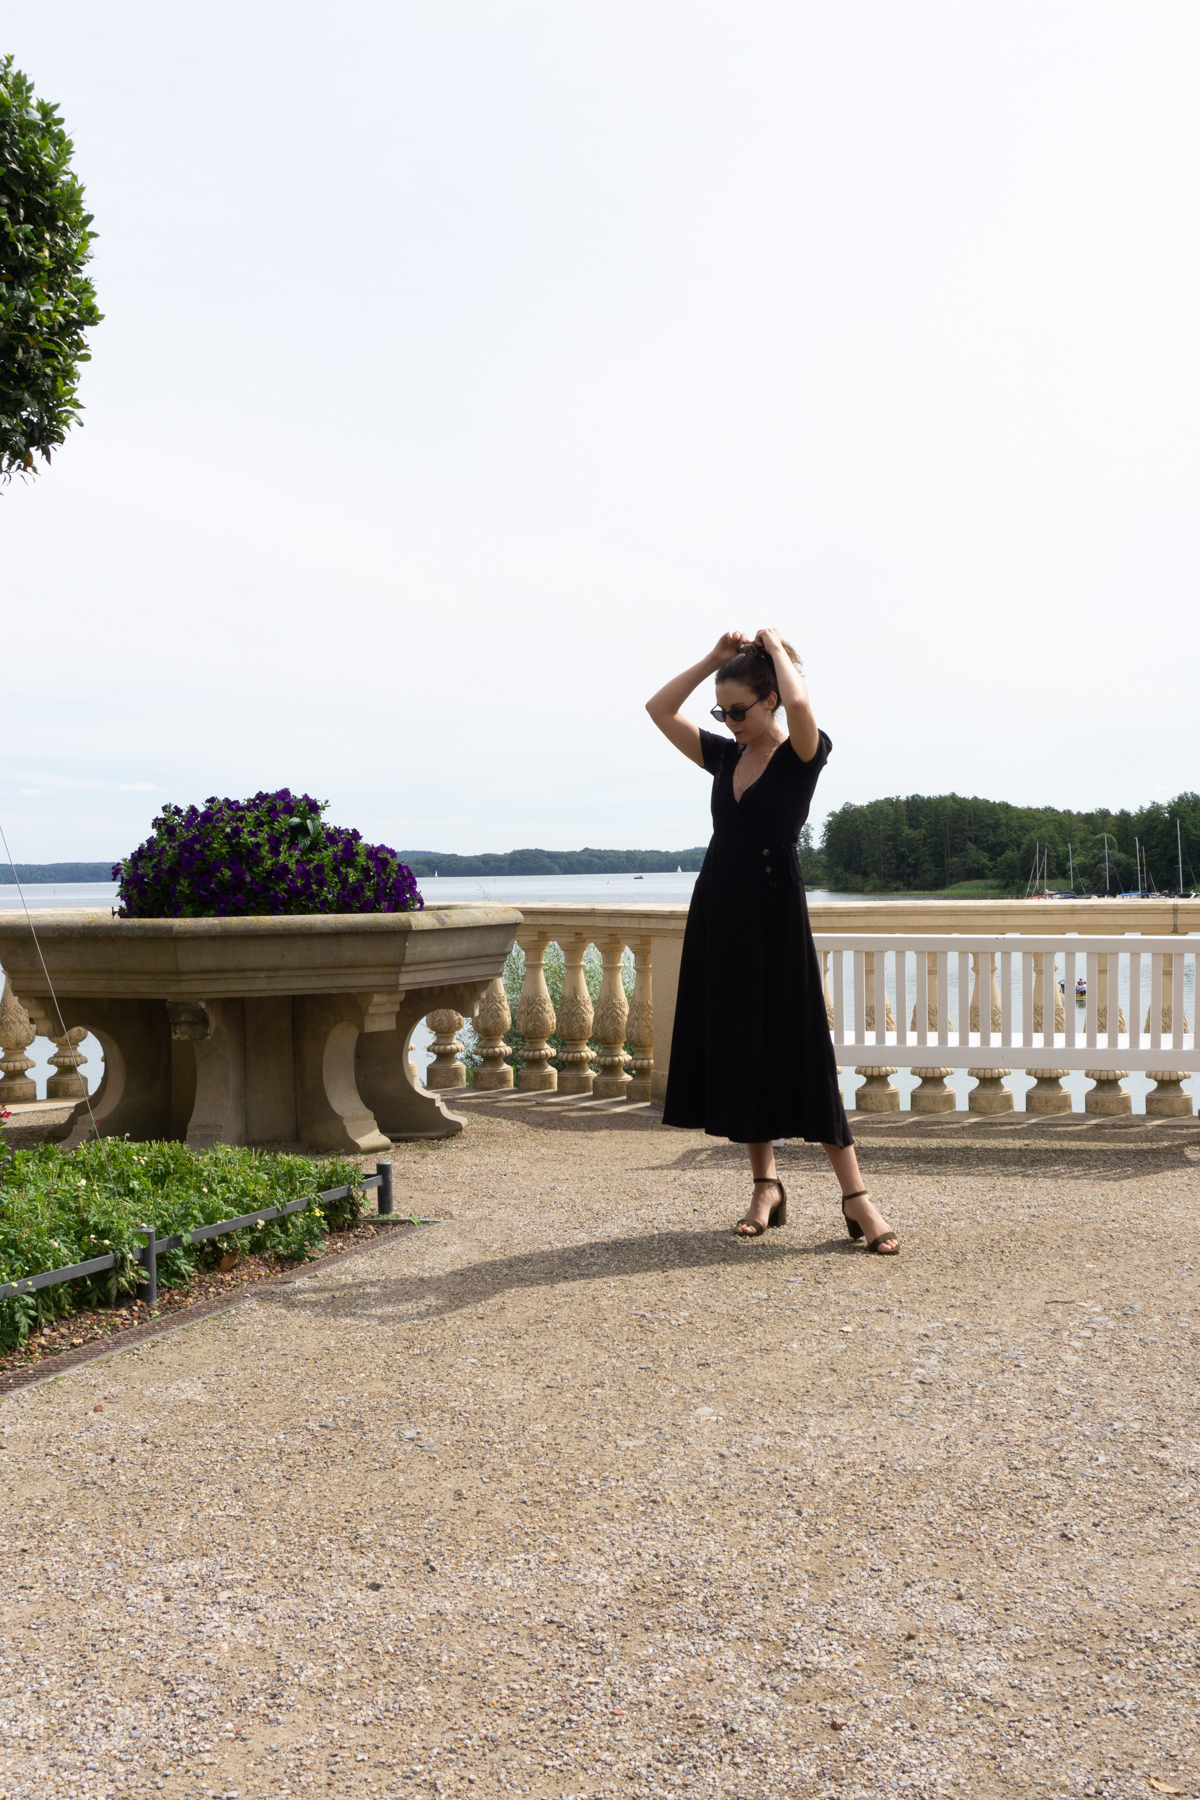 & Other Stories Dress ~ Summer Style, Schwerin Castle ~ a Day Trip from Berlin Germany / RG Daily Travel Guide